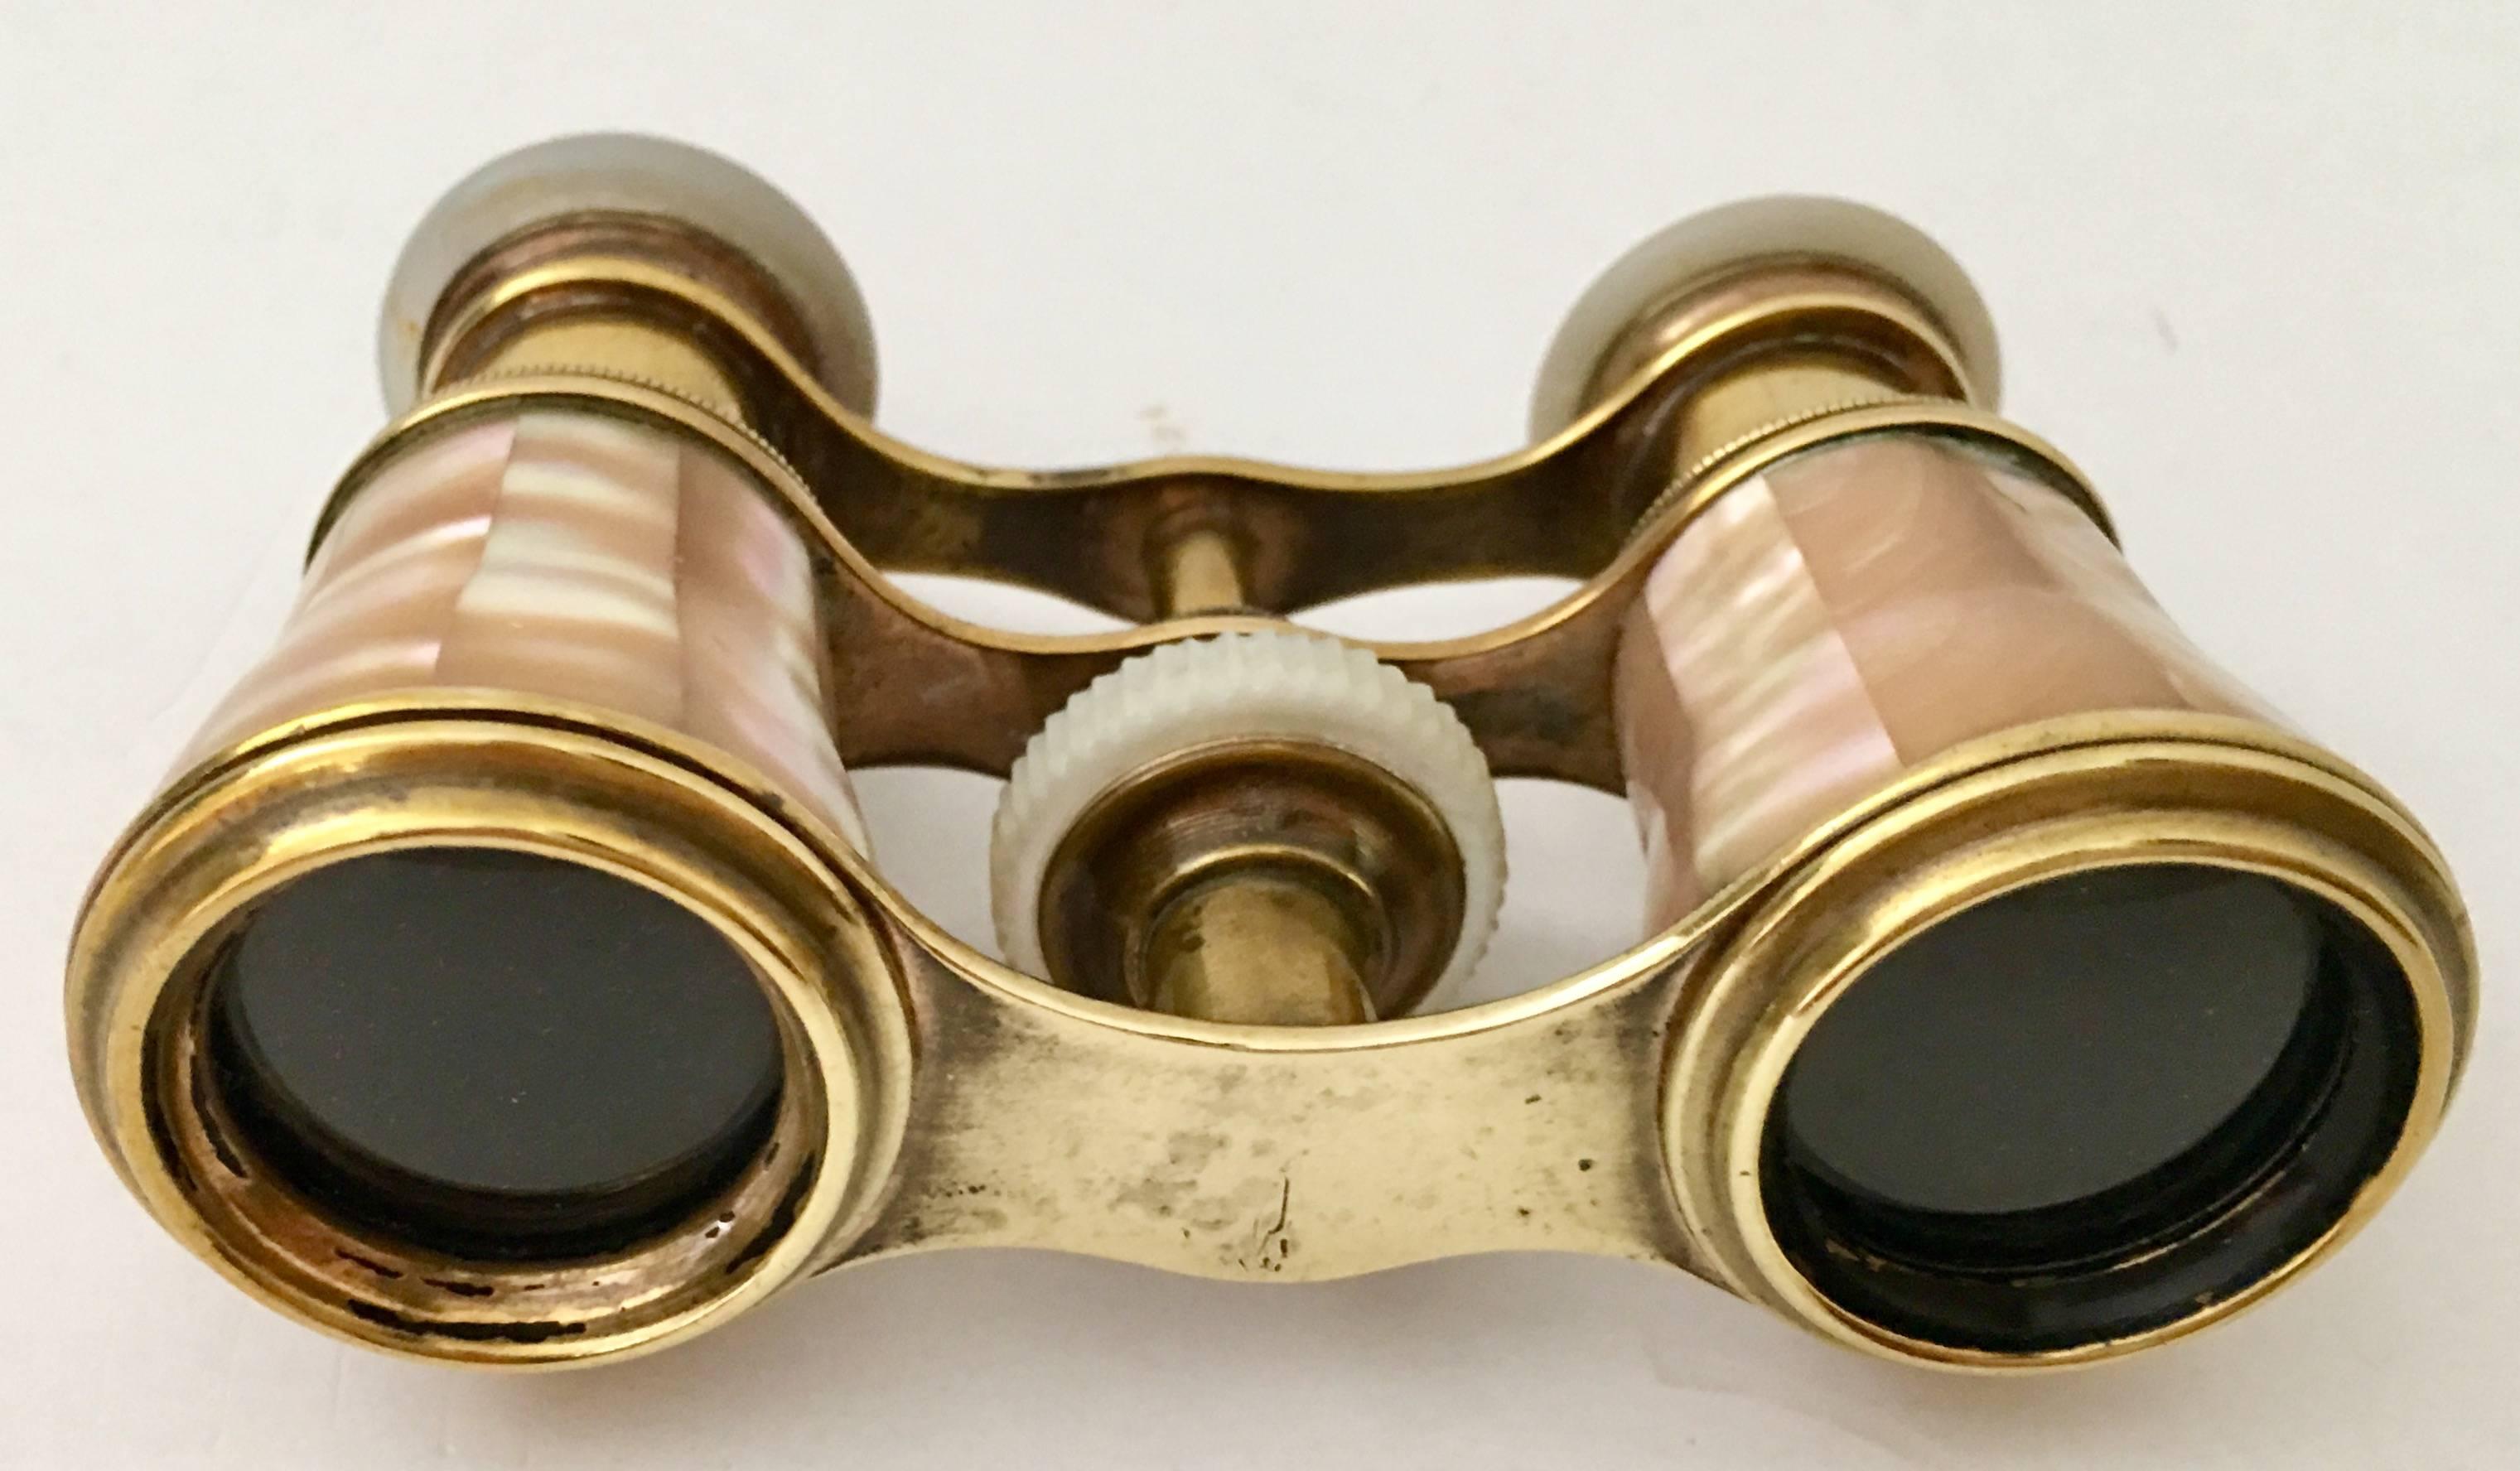 Fantastic solid brass and mother-of-pearl opera glasses-binoculars By, Lamaer Paris. The original shagreen velvet lined protective storage case in included. Each lens is signed Lamaer Paris. Optics are in full working order. Height when not in use,